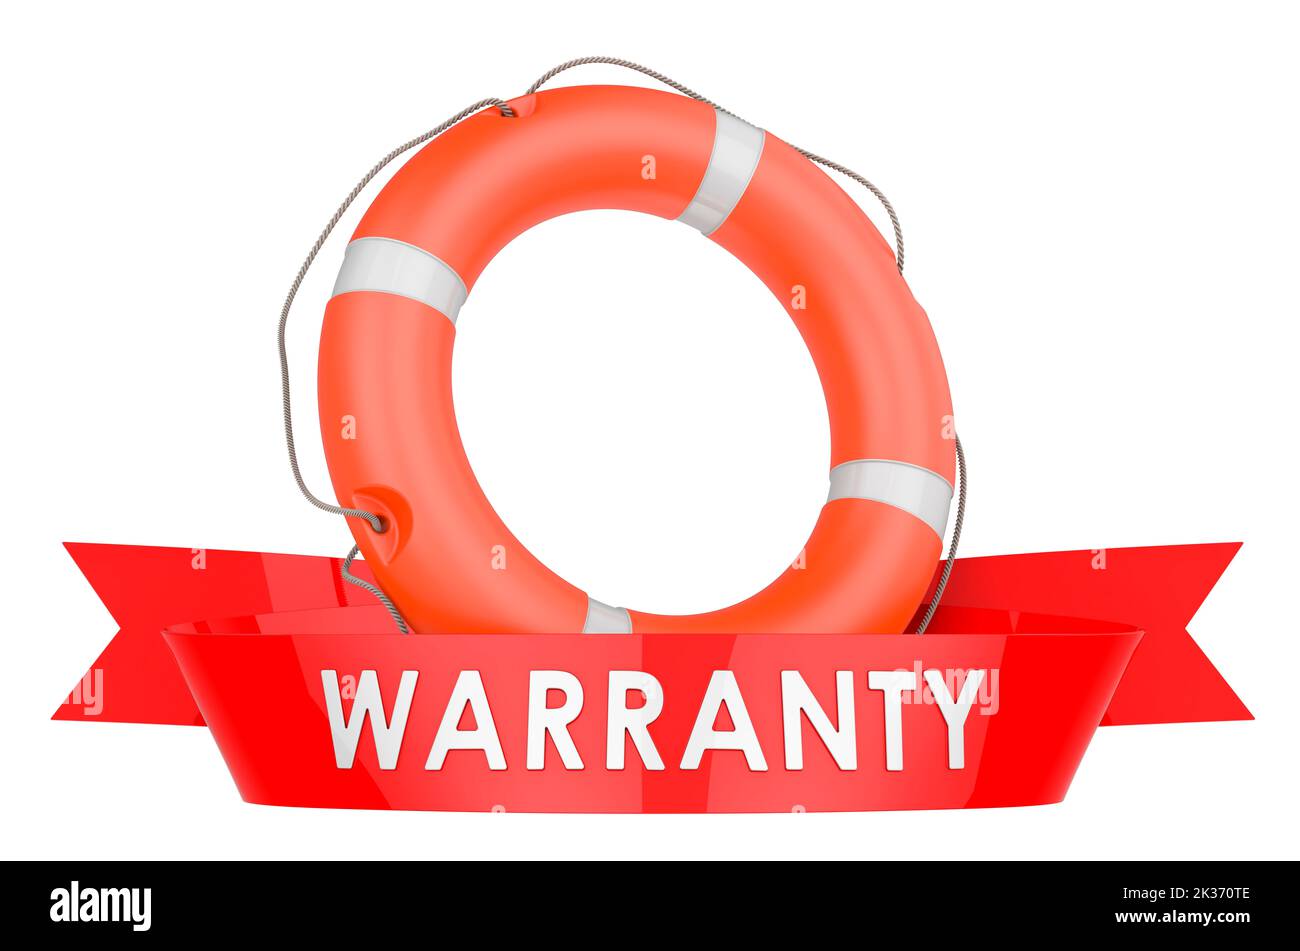 Lifebelt warranty concept. 3D rendering isolated on white background Stock Photo